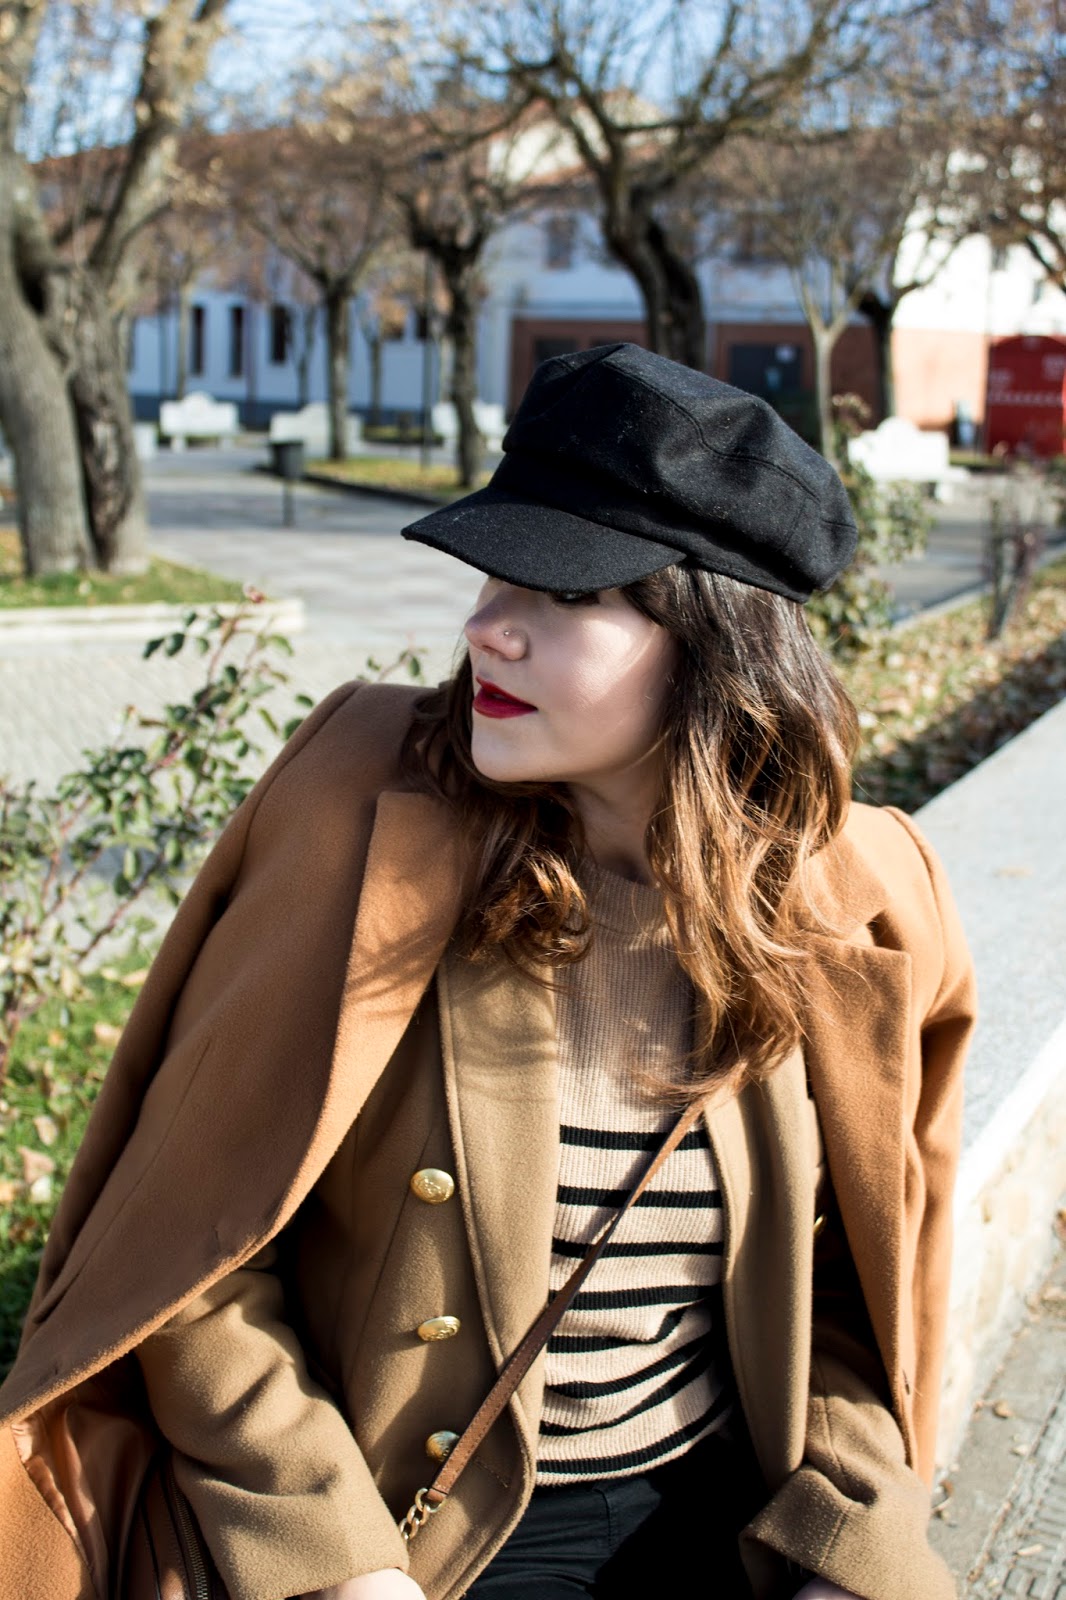 Gorra marinera / hat outfit